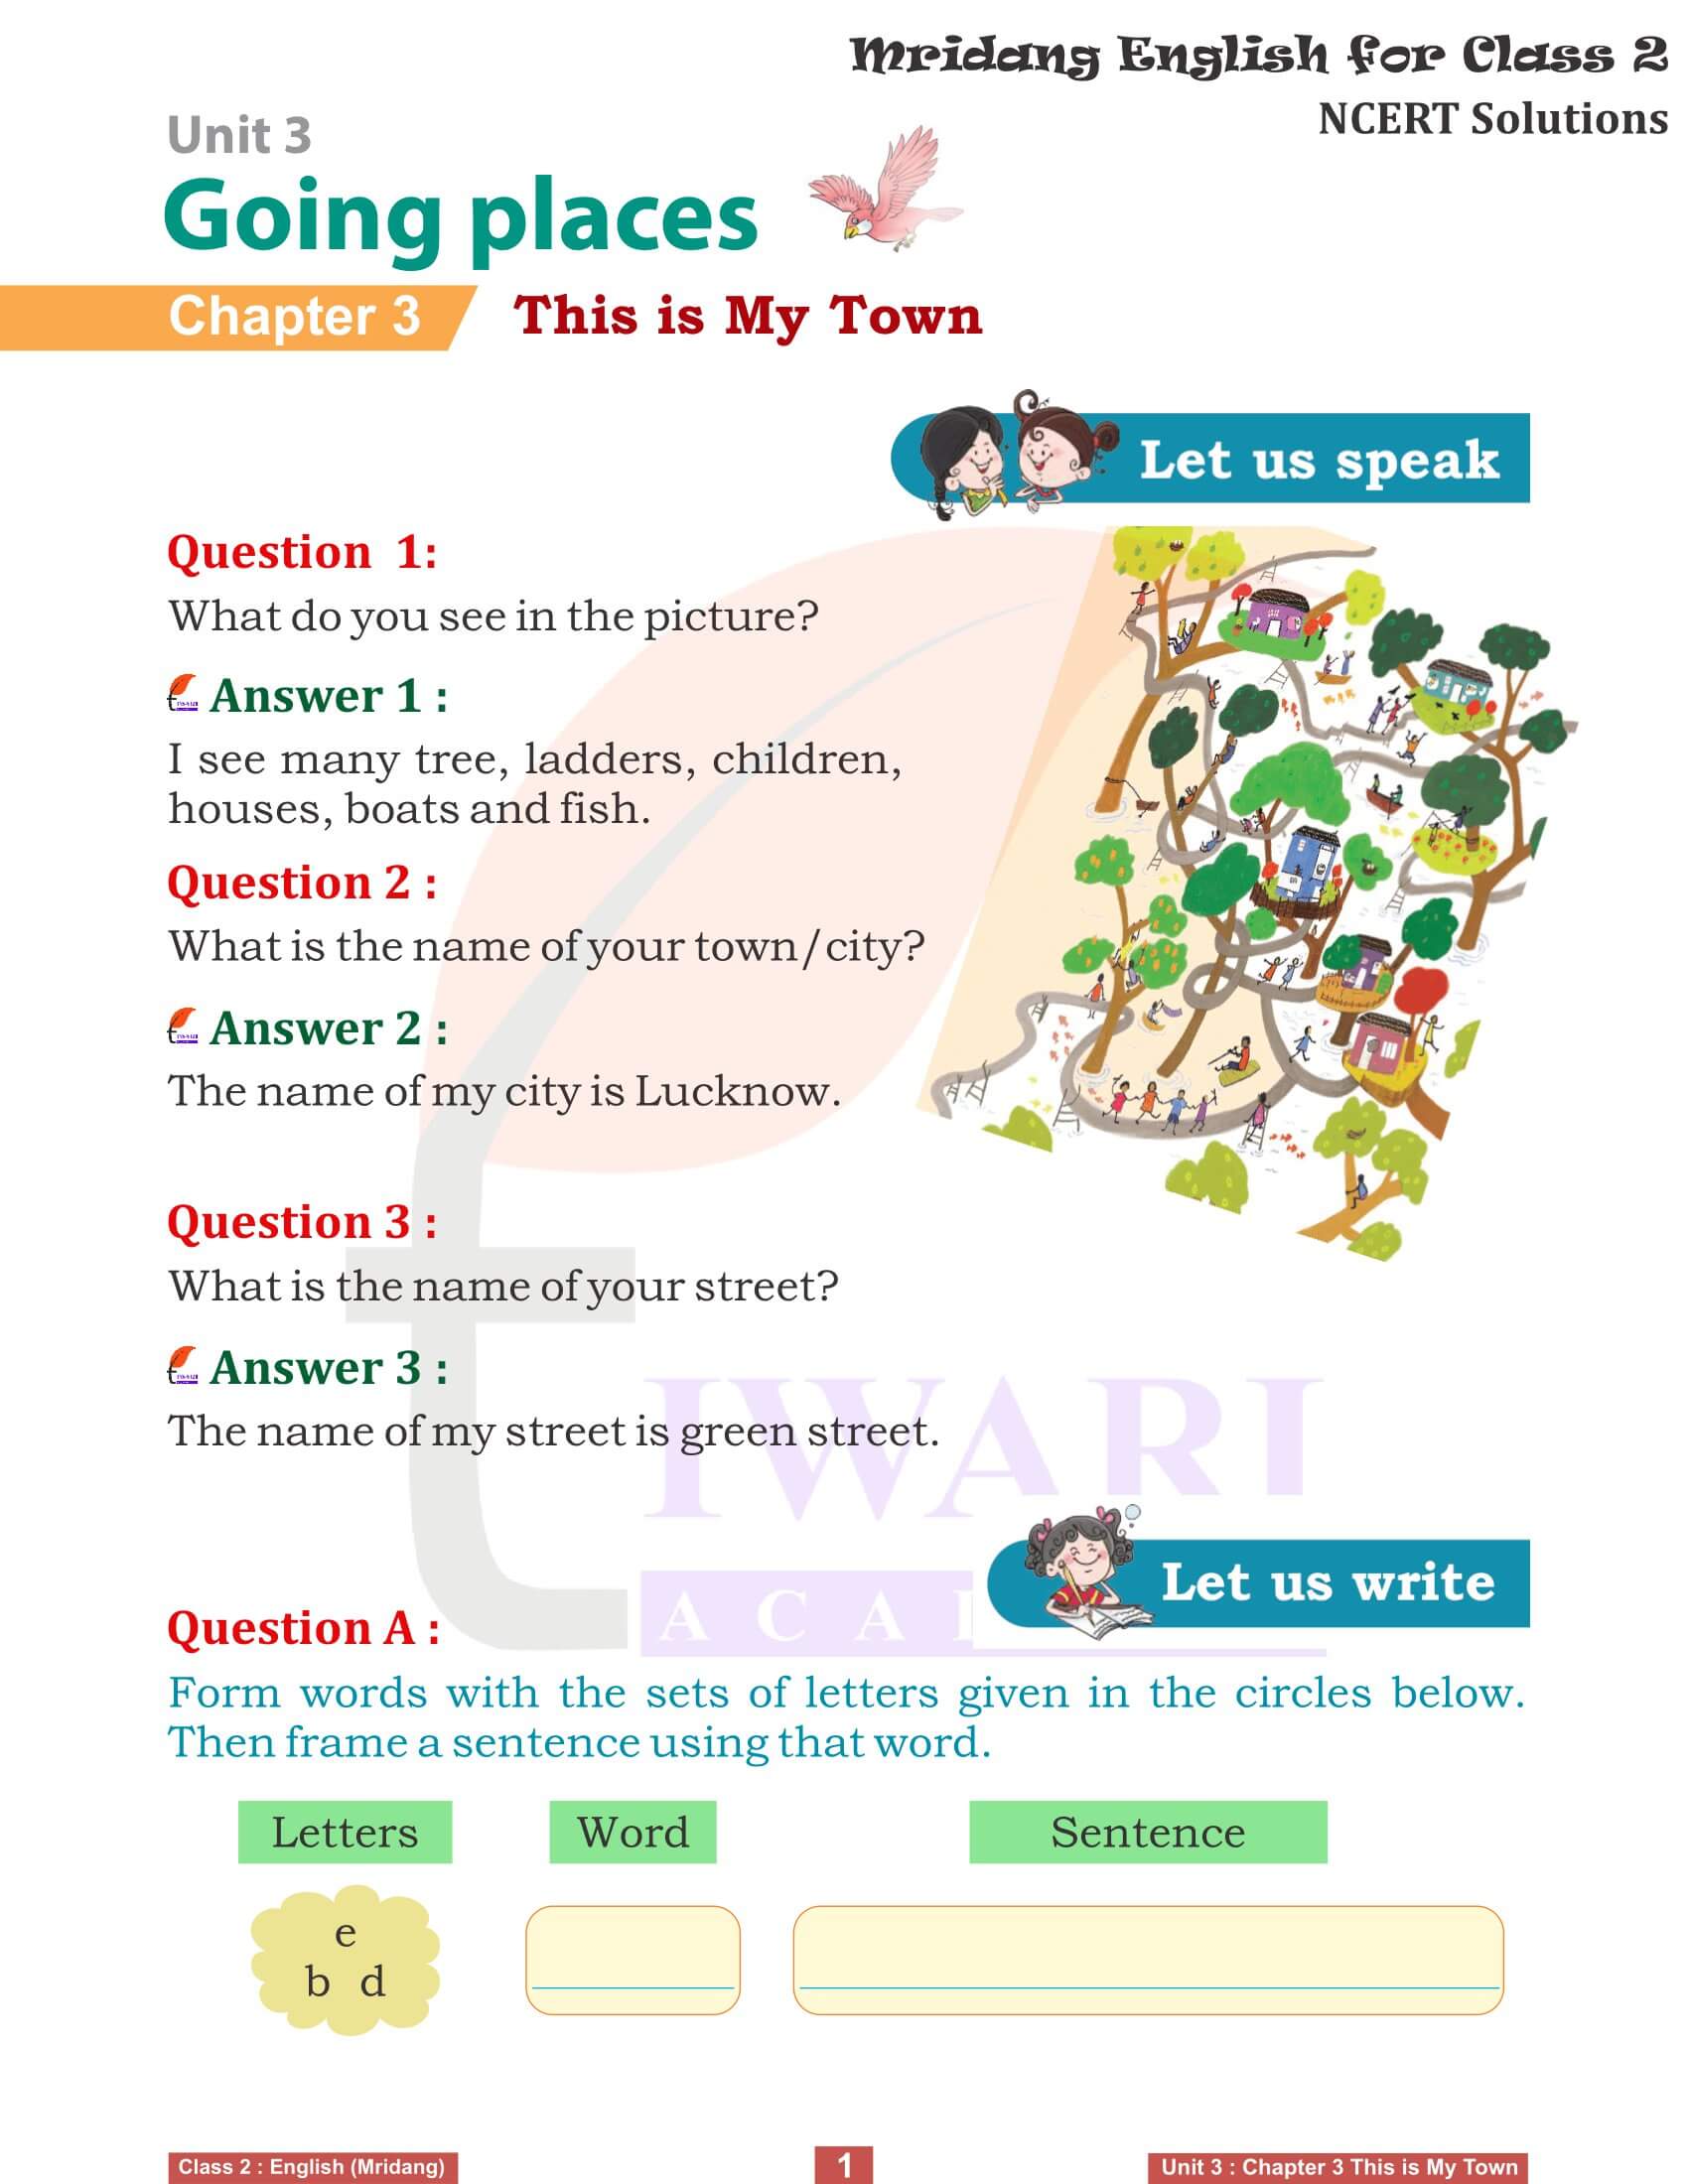 NCERT Solutions for Class 2 English Mridang Unit 3 Going Places Chapter 3 This is My Town